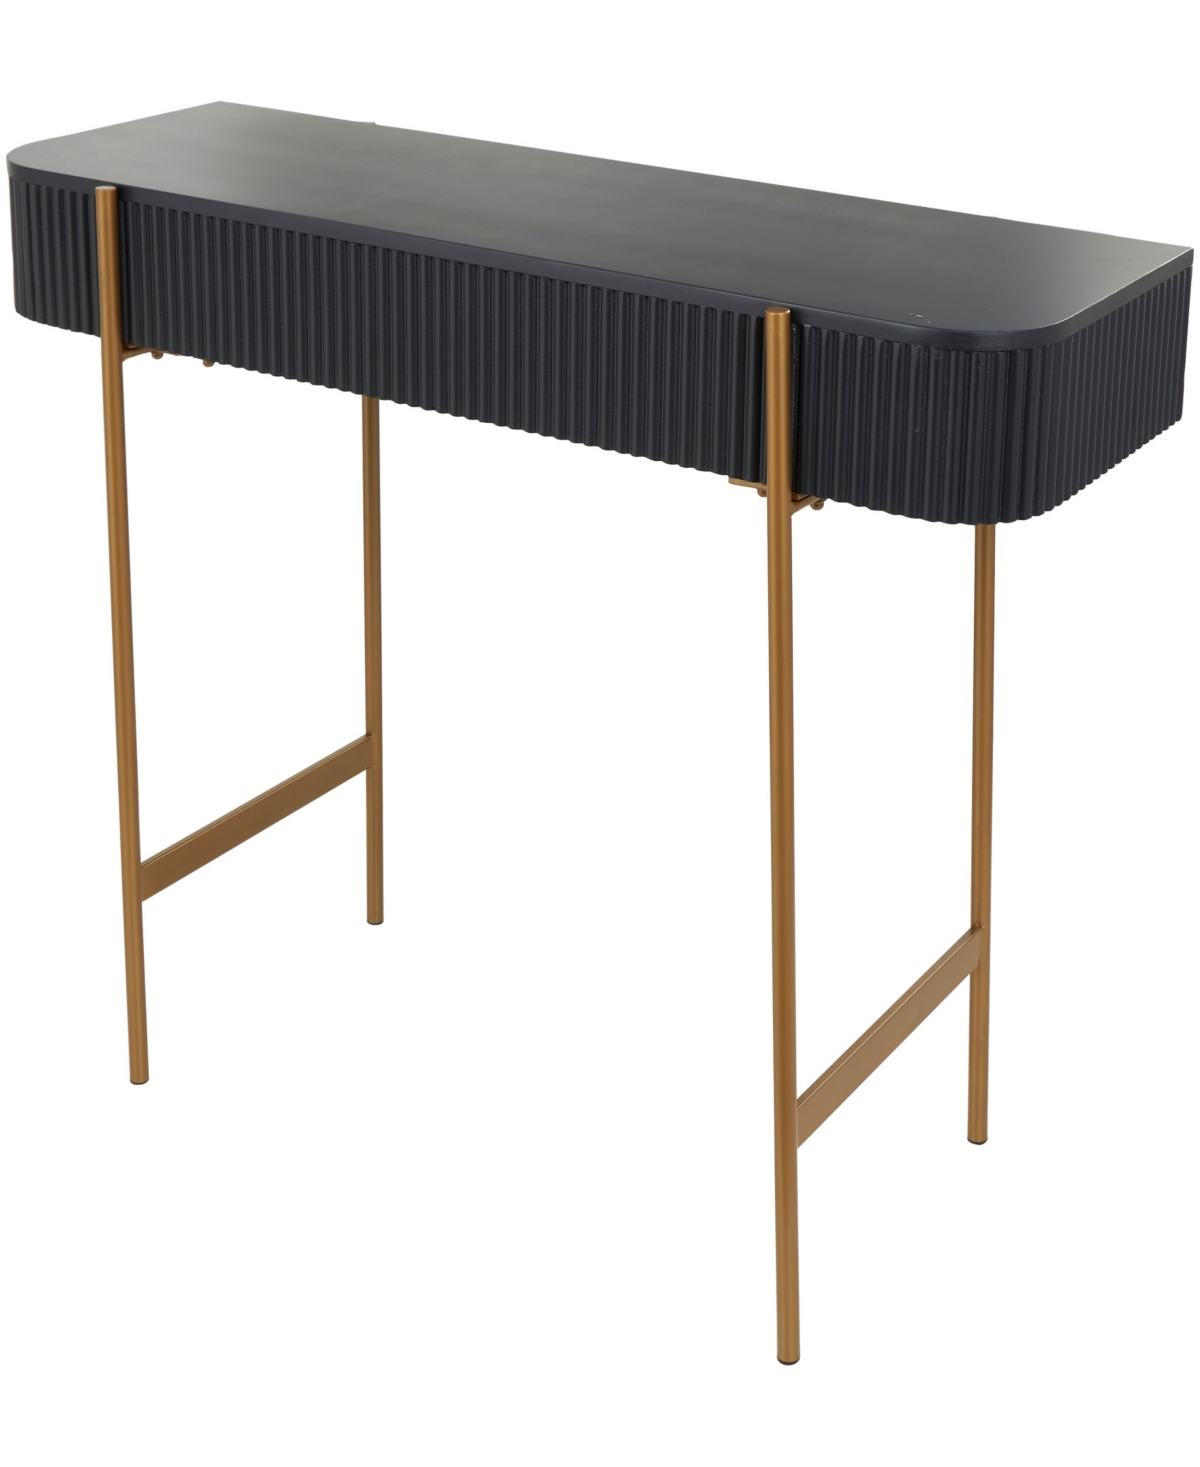 Rosemary Lane 42" X 16" X 30" Wooden Gold-tone Metal Legs Console Table In Black